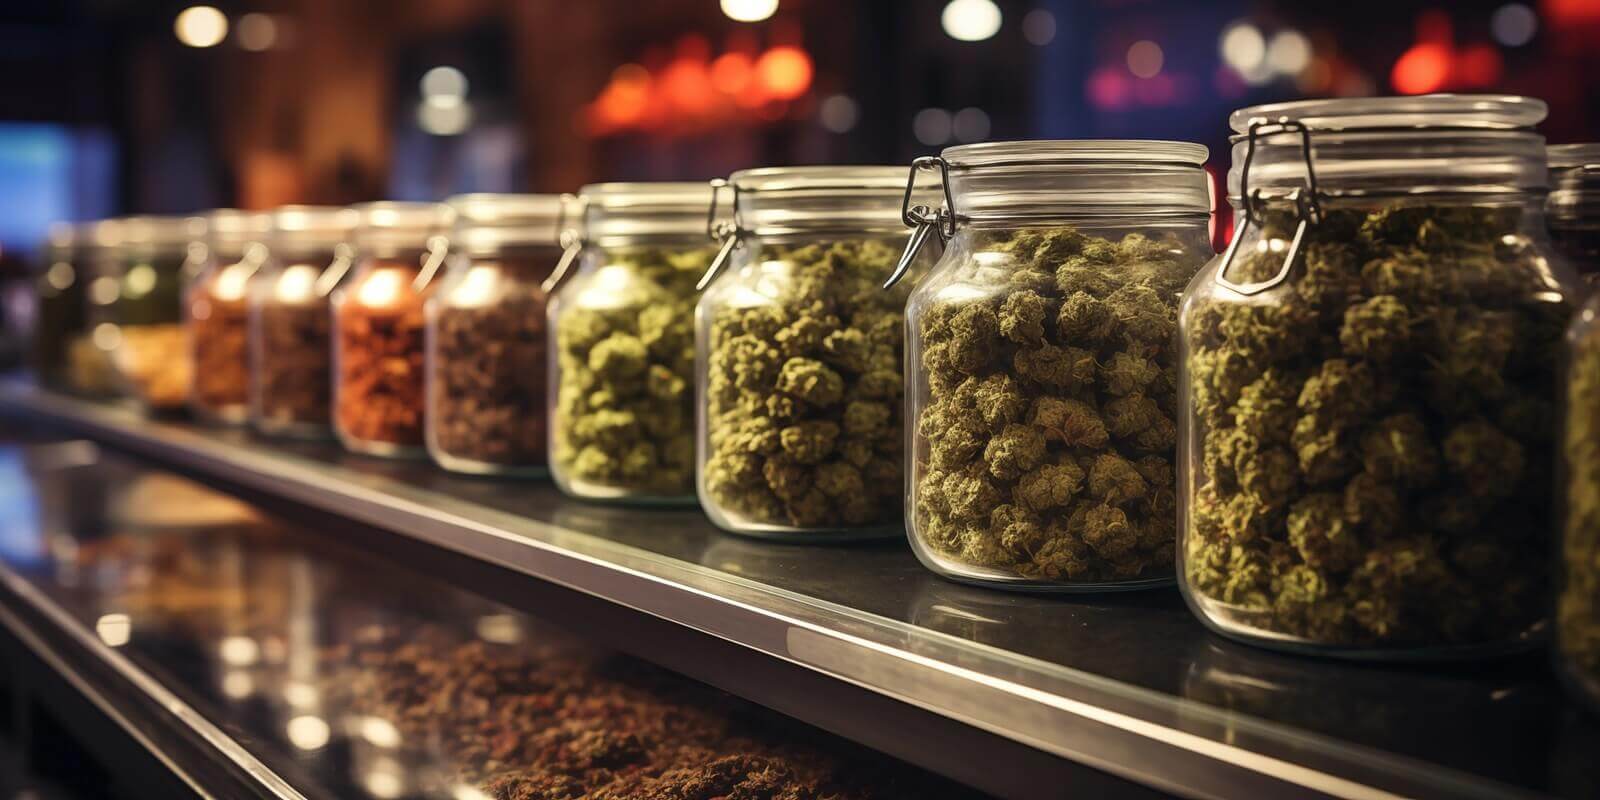 Boston dispensary counter with glass jar filled with different cannabis strains